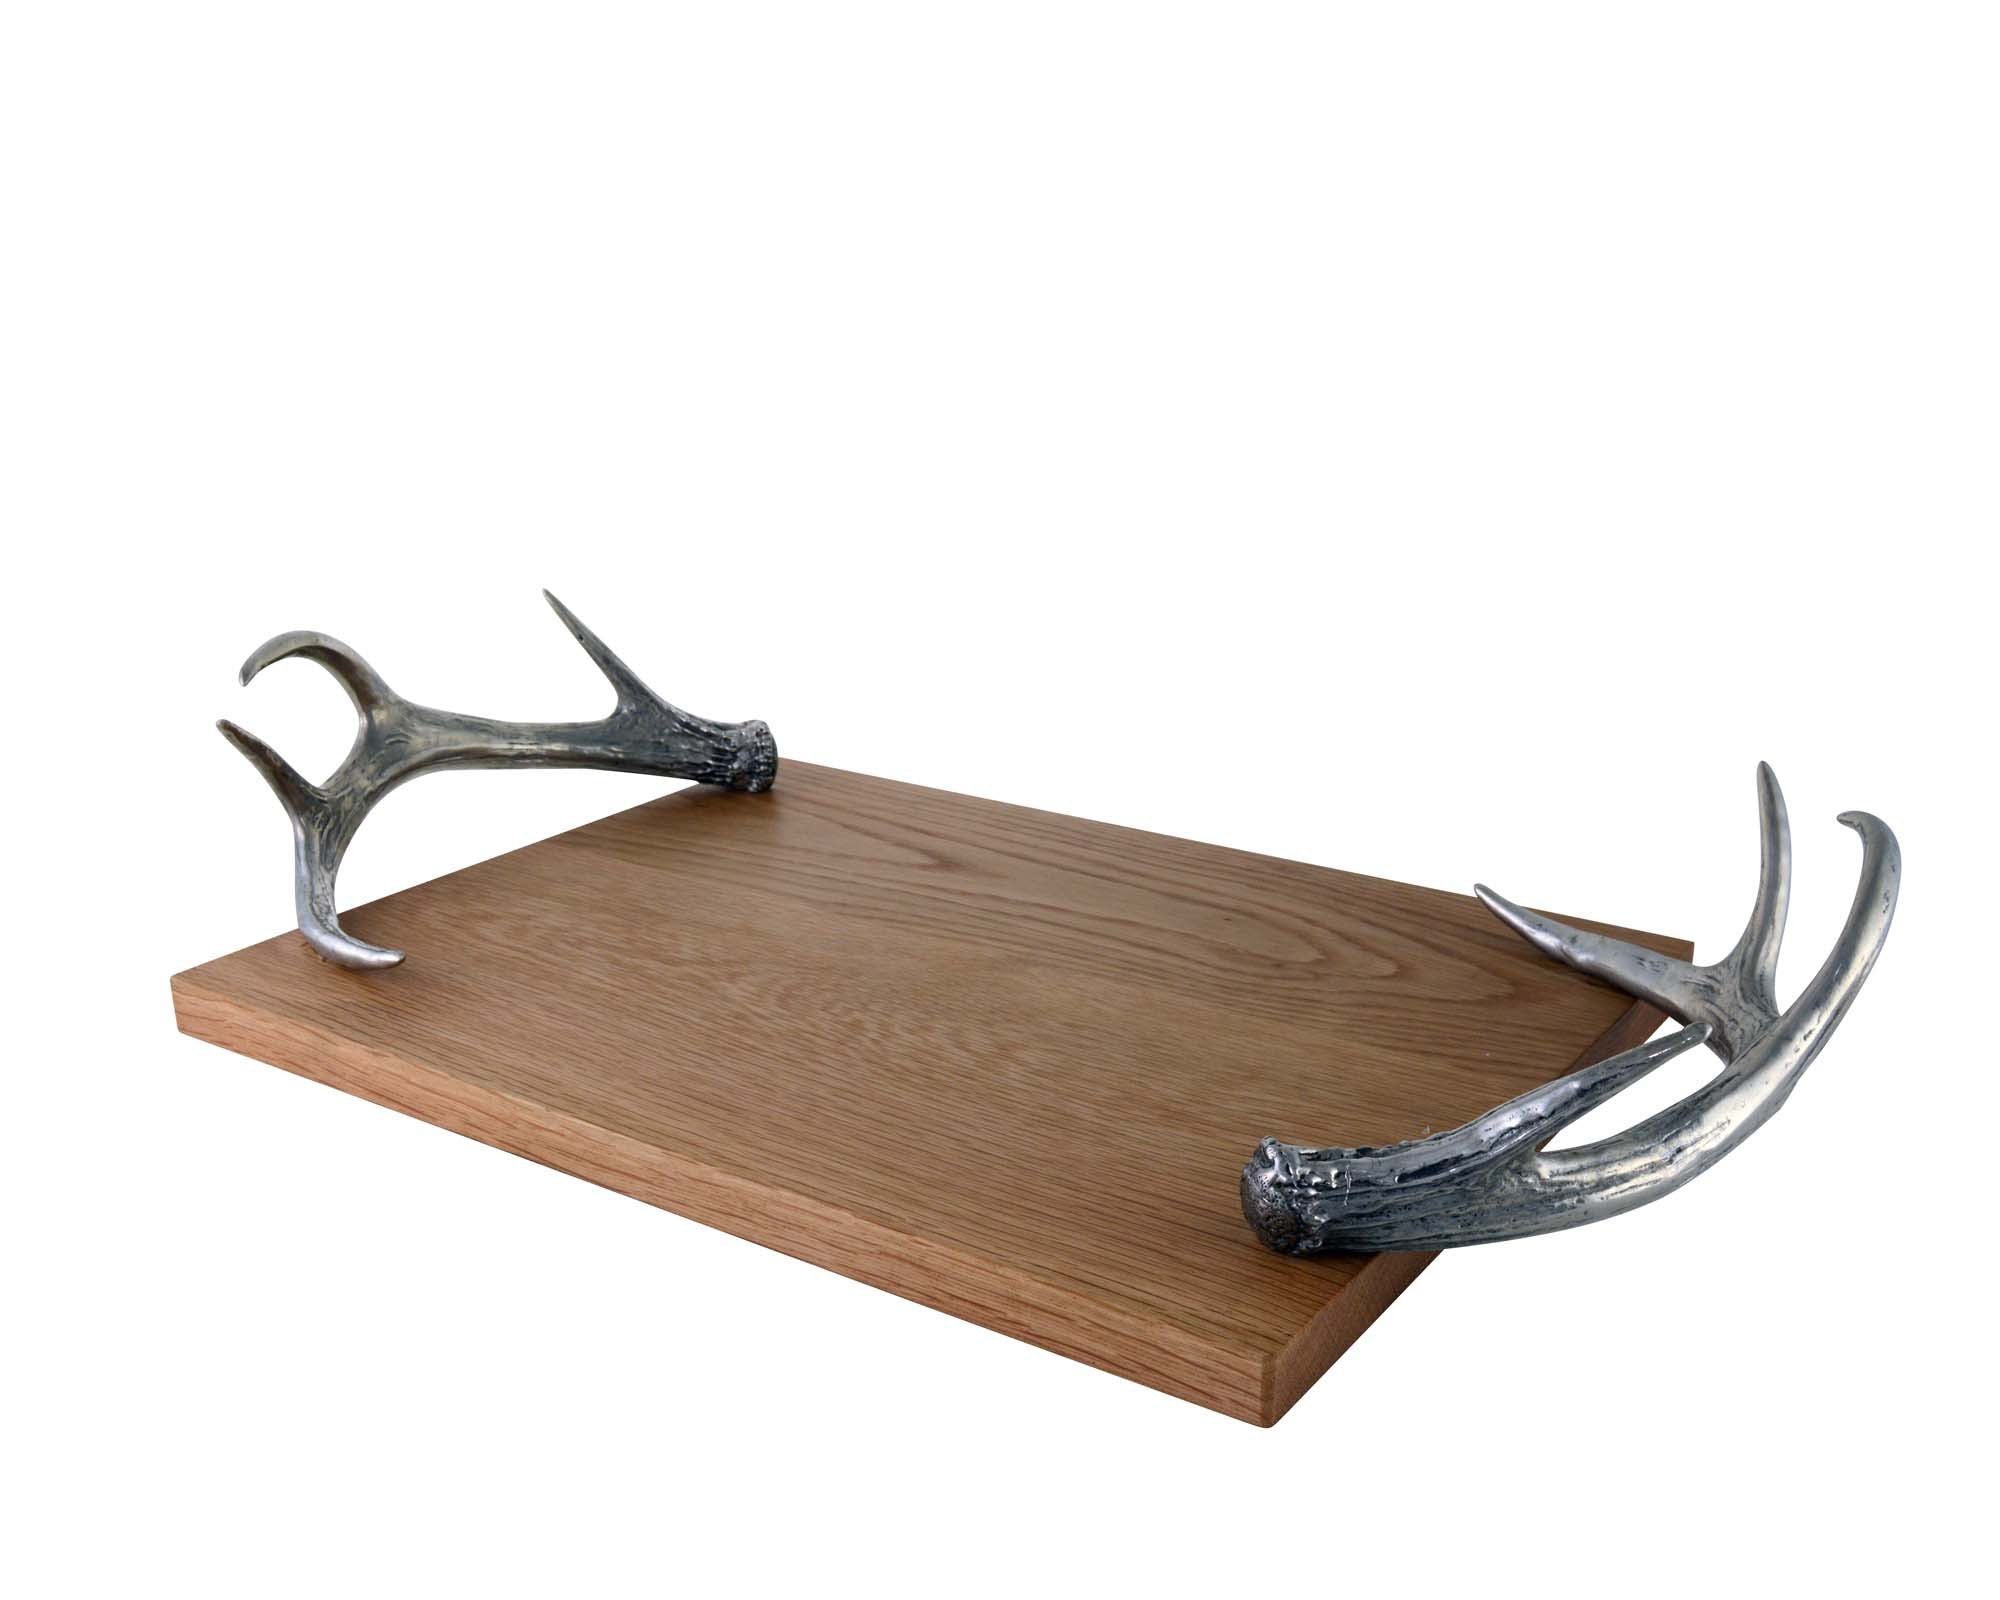 Vagabond House Cheese Tray With Pewter Antler Handles Product Image